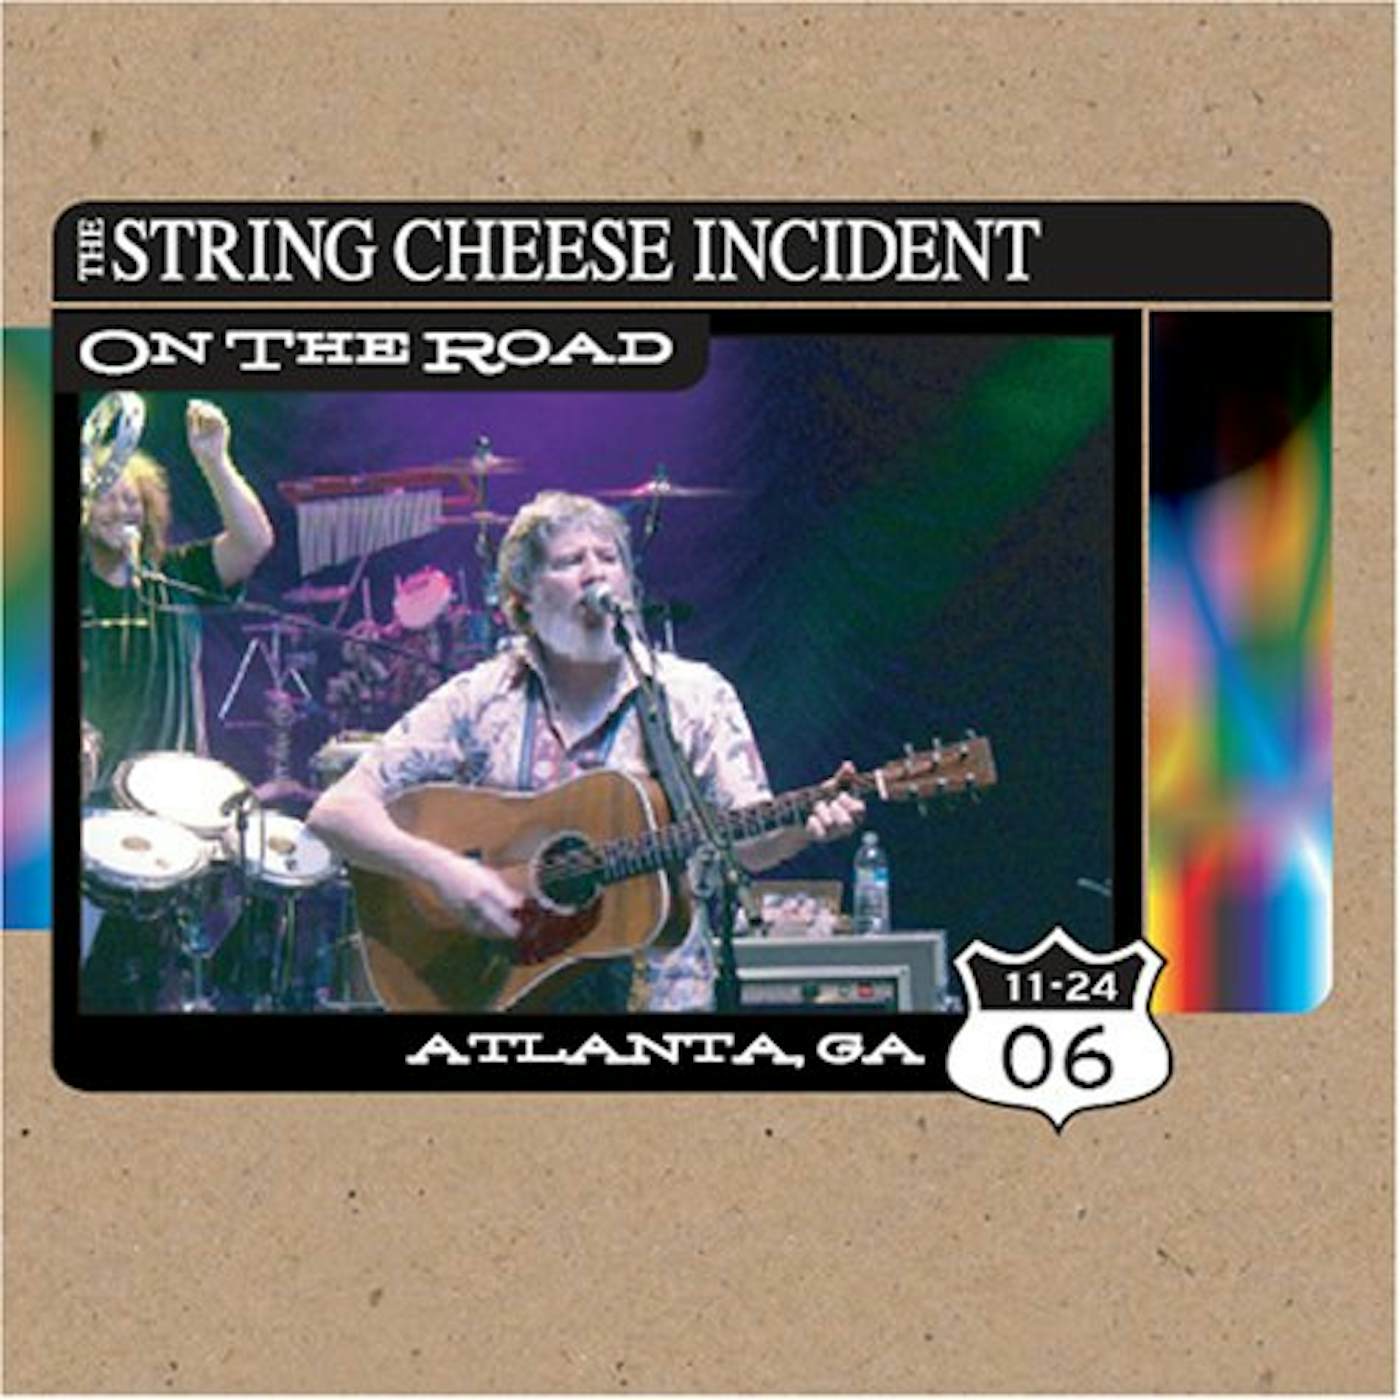 The String Cheese Incident ON THE ROAD: ATLANTA GA 11-24-06 CD